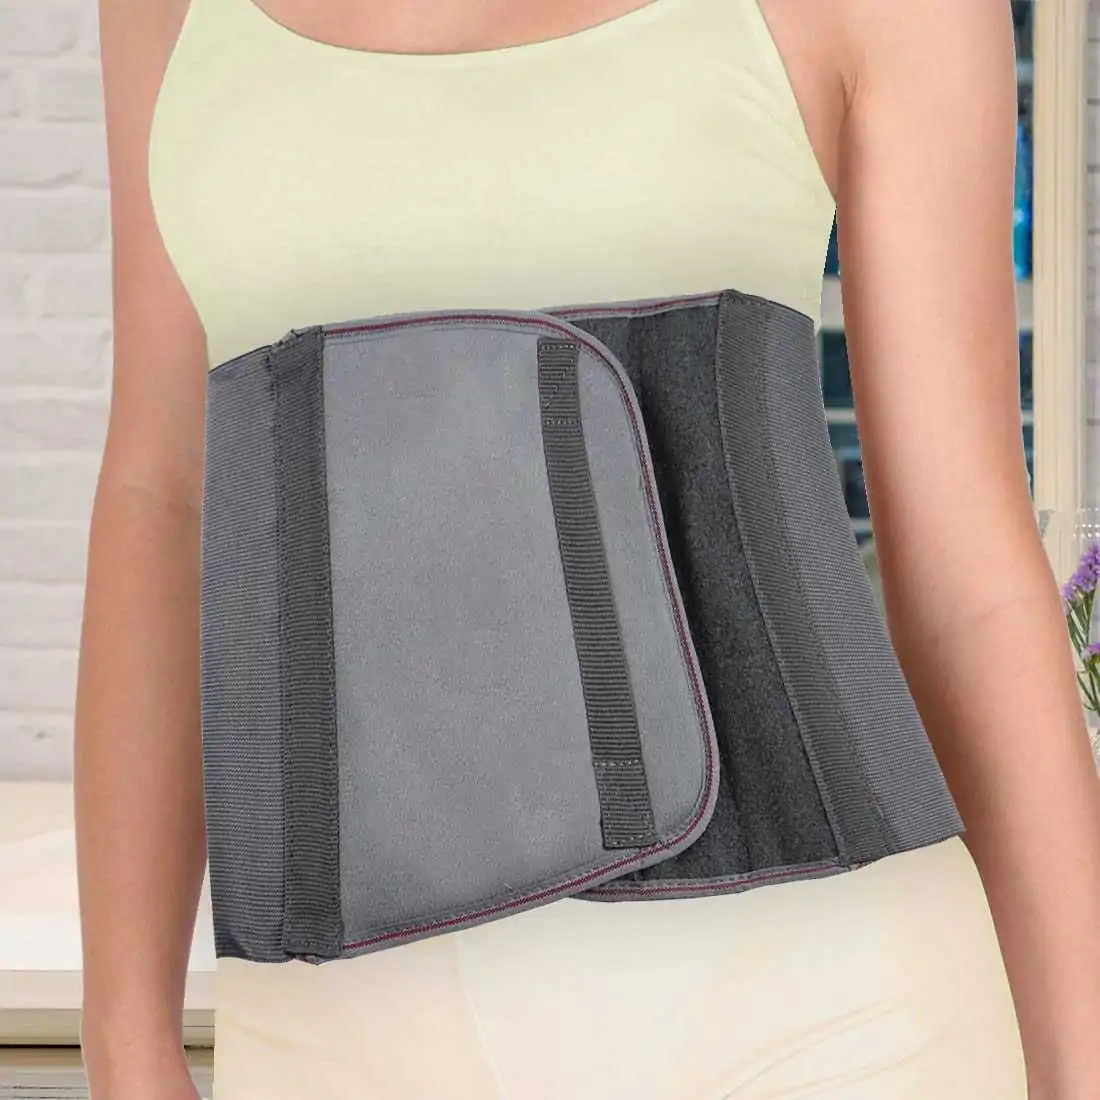 Post Pregnancy Support & Recovery Belt for Compression Support - XL